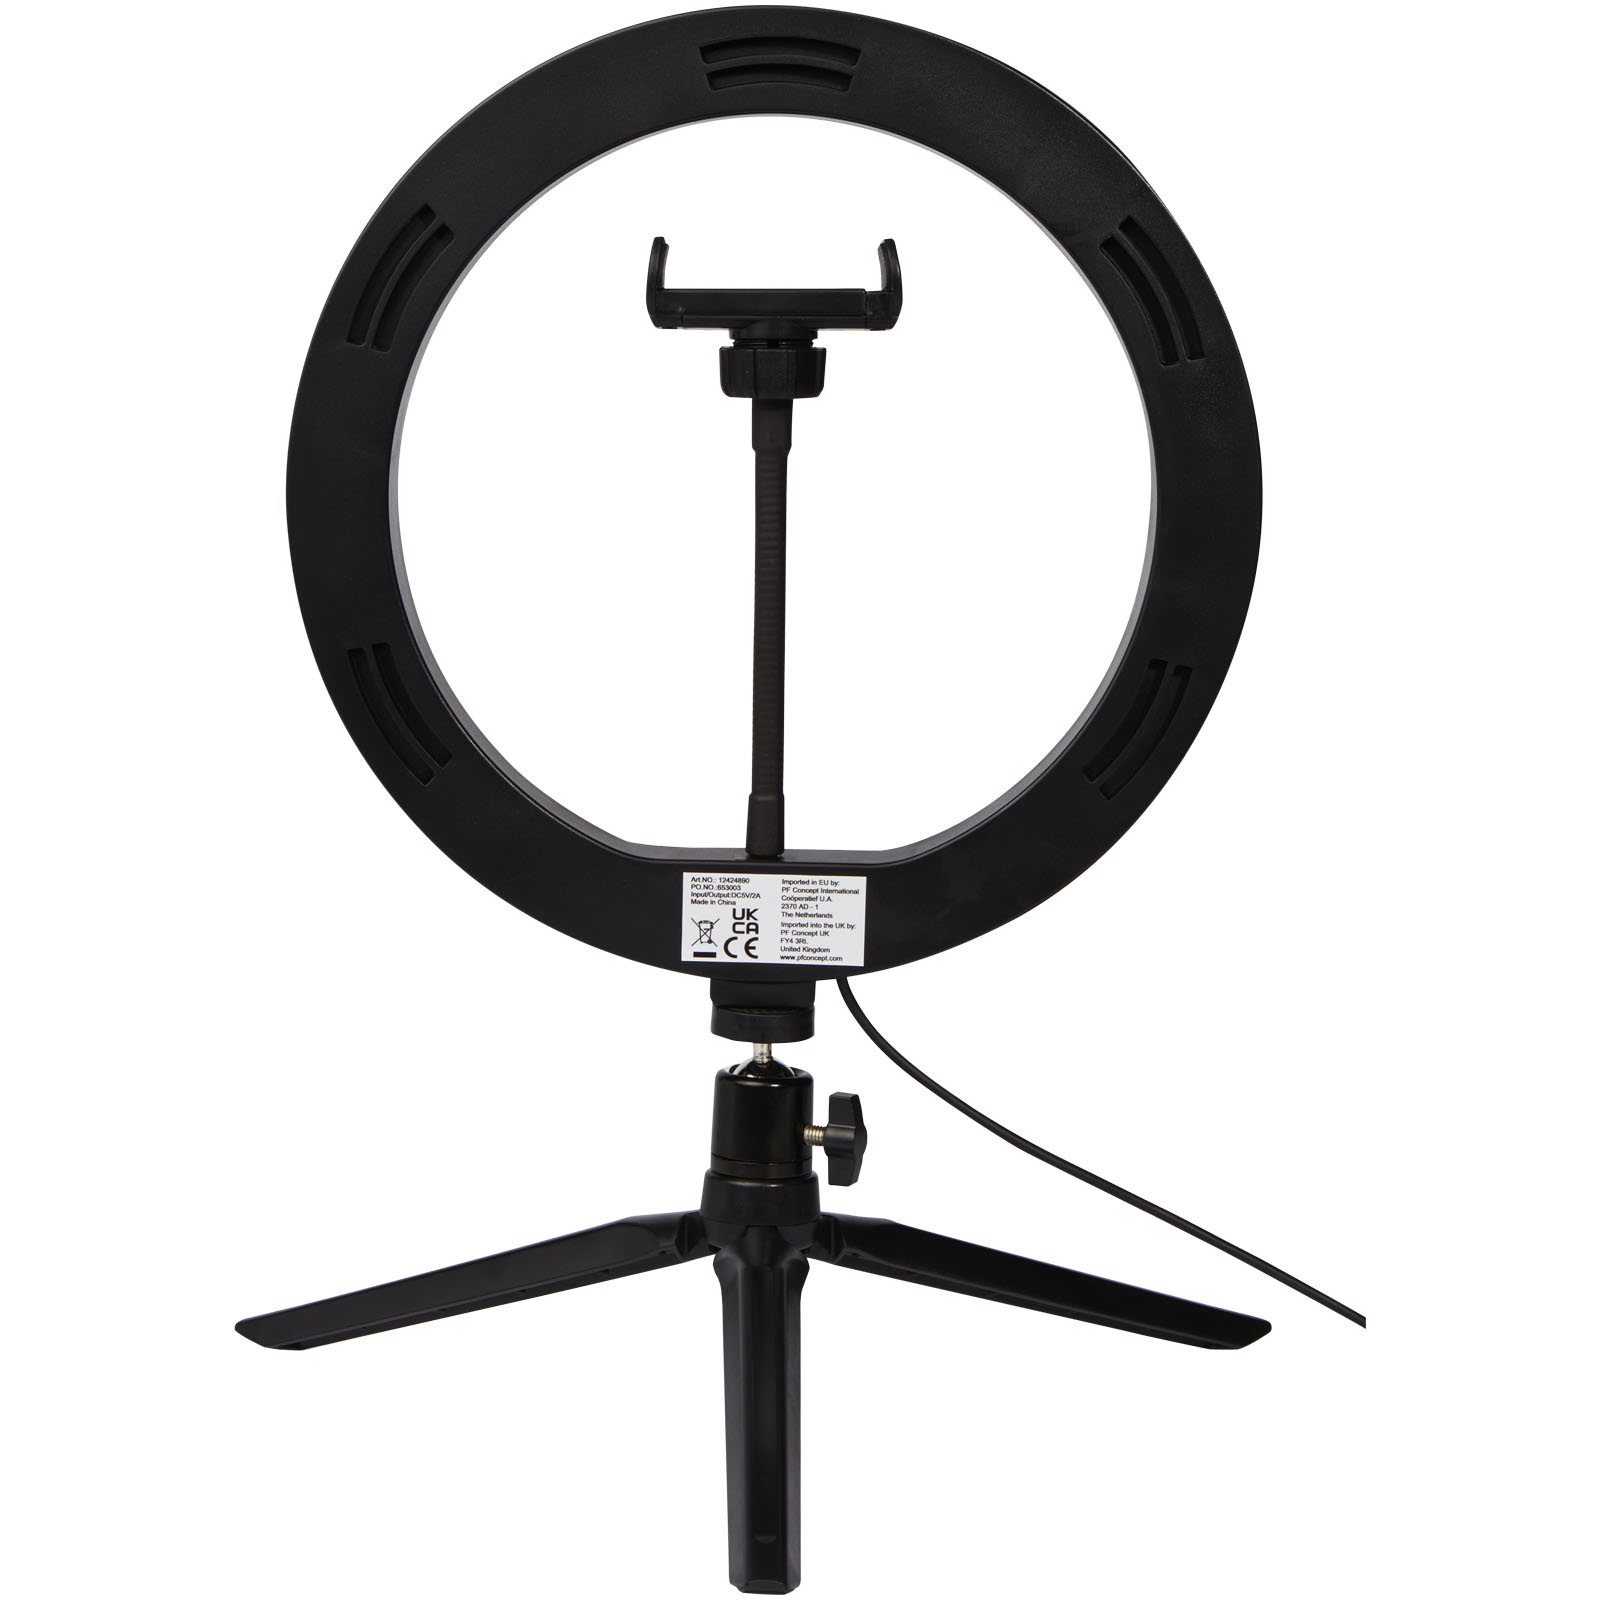 Advertising Telephone & Tablet Accessories - Studio ring light for selfies and vlogging with phone holder and tripod - 3